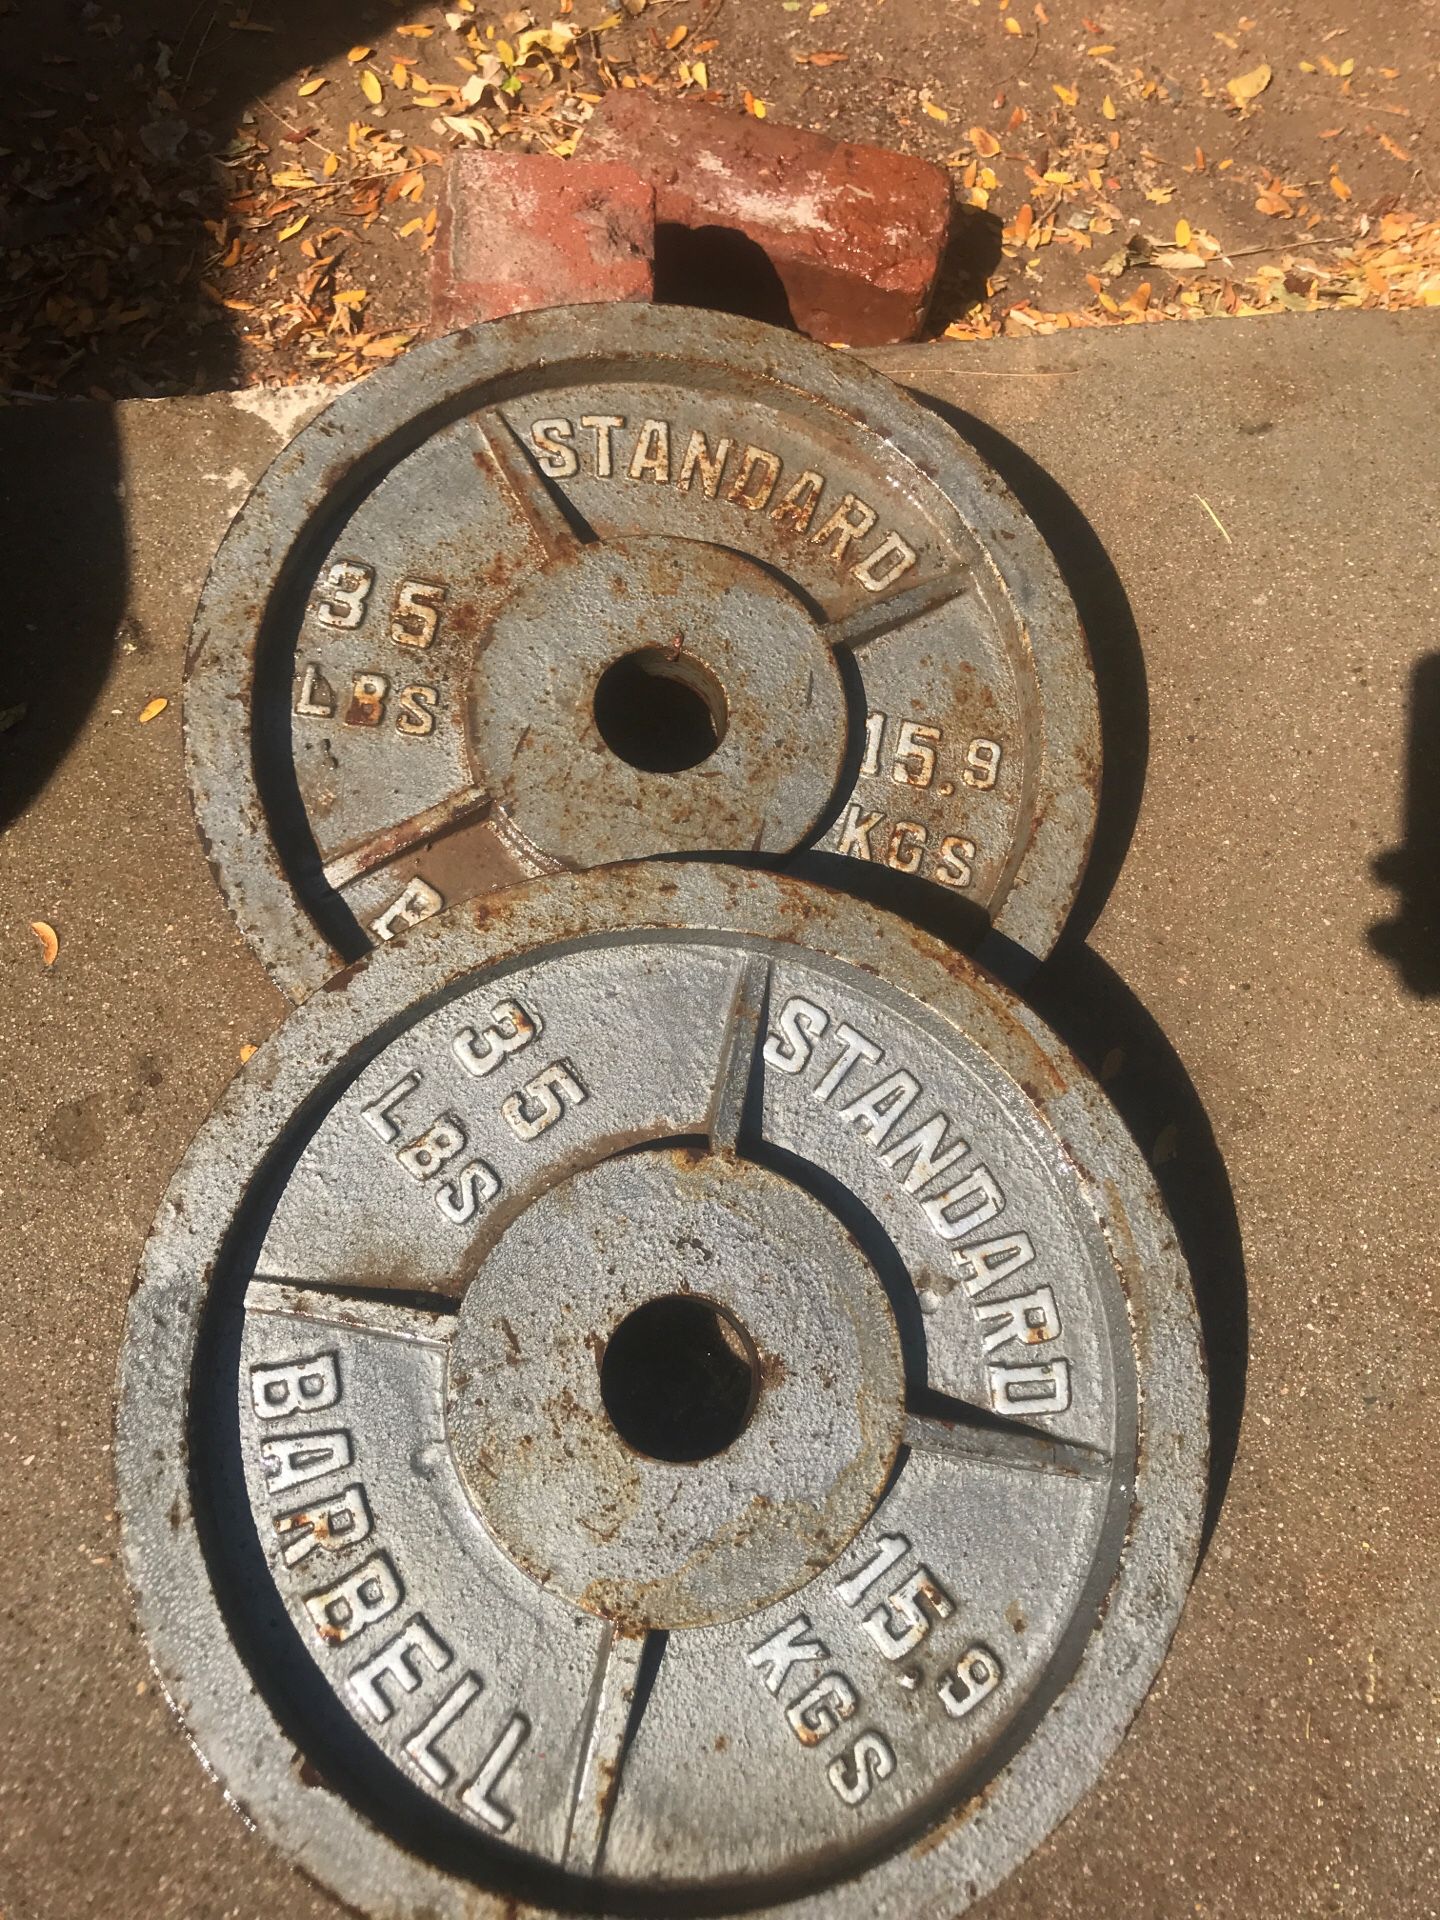 35 lb Olympic bar weights